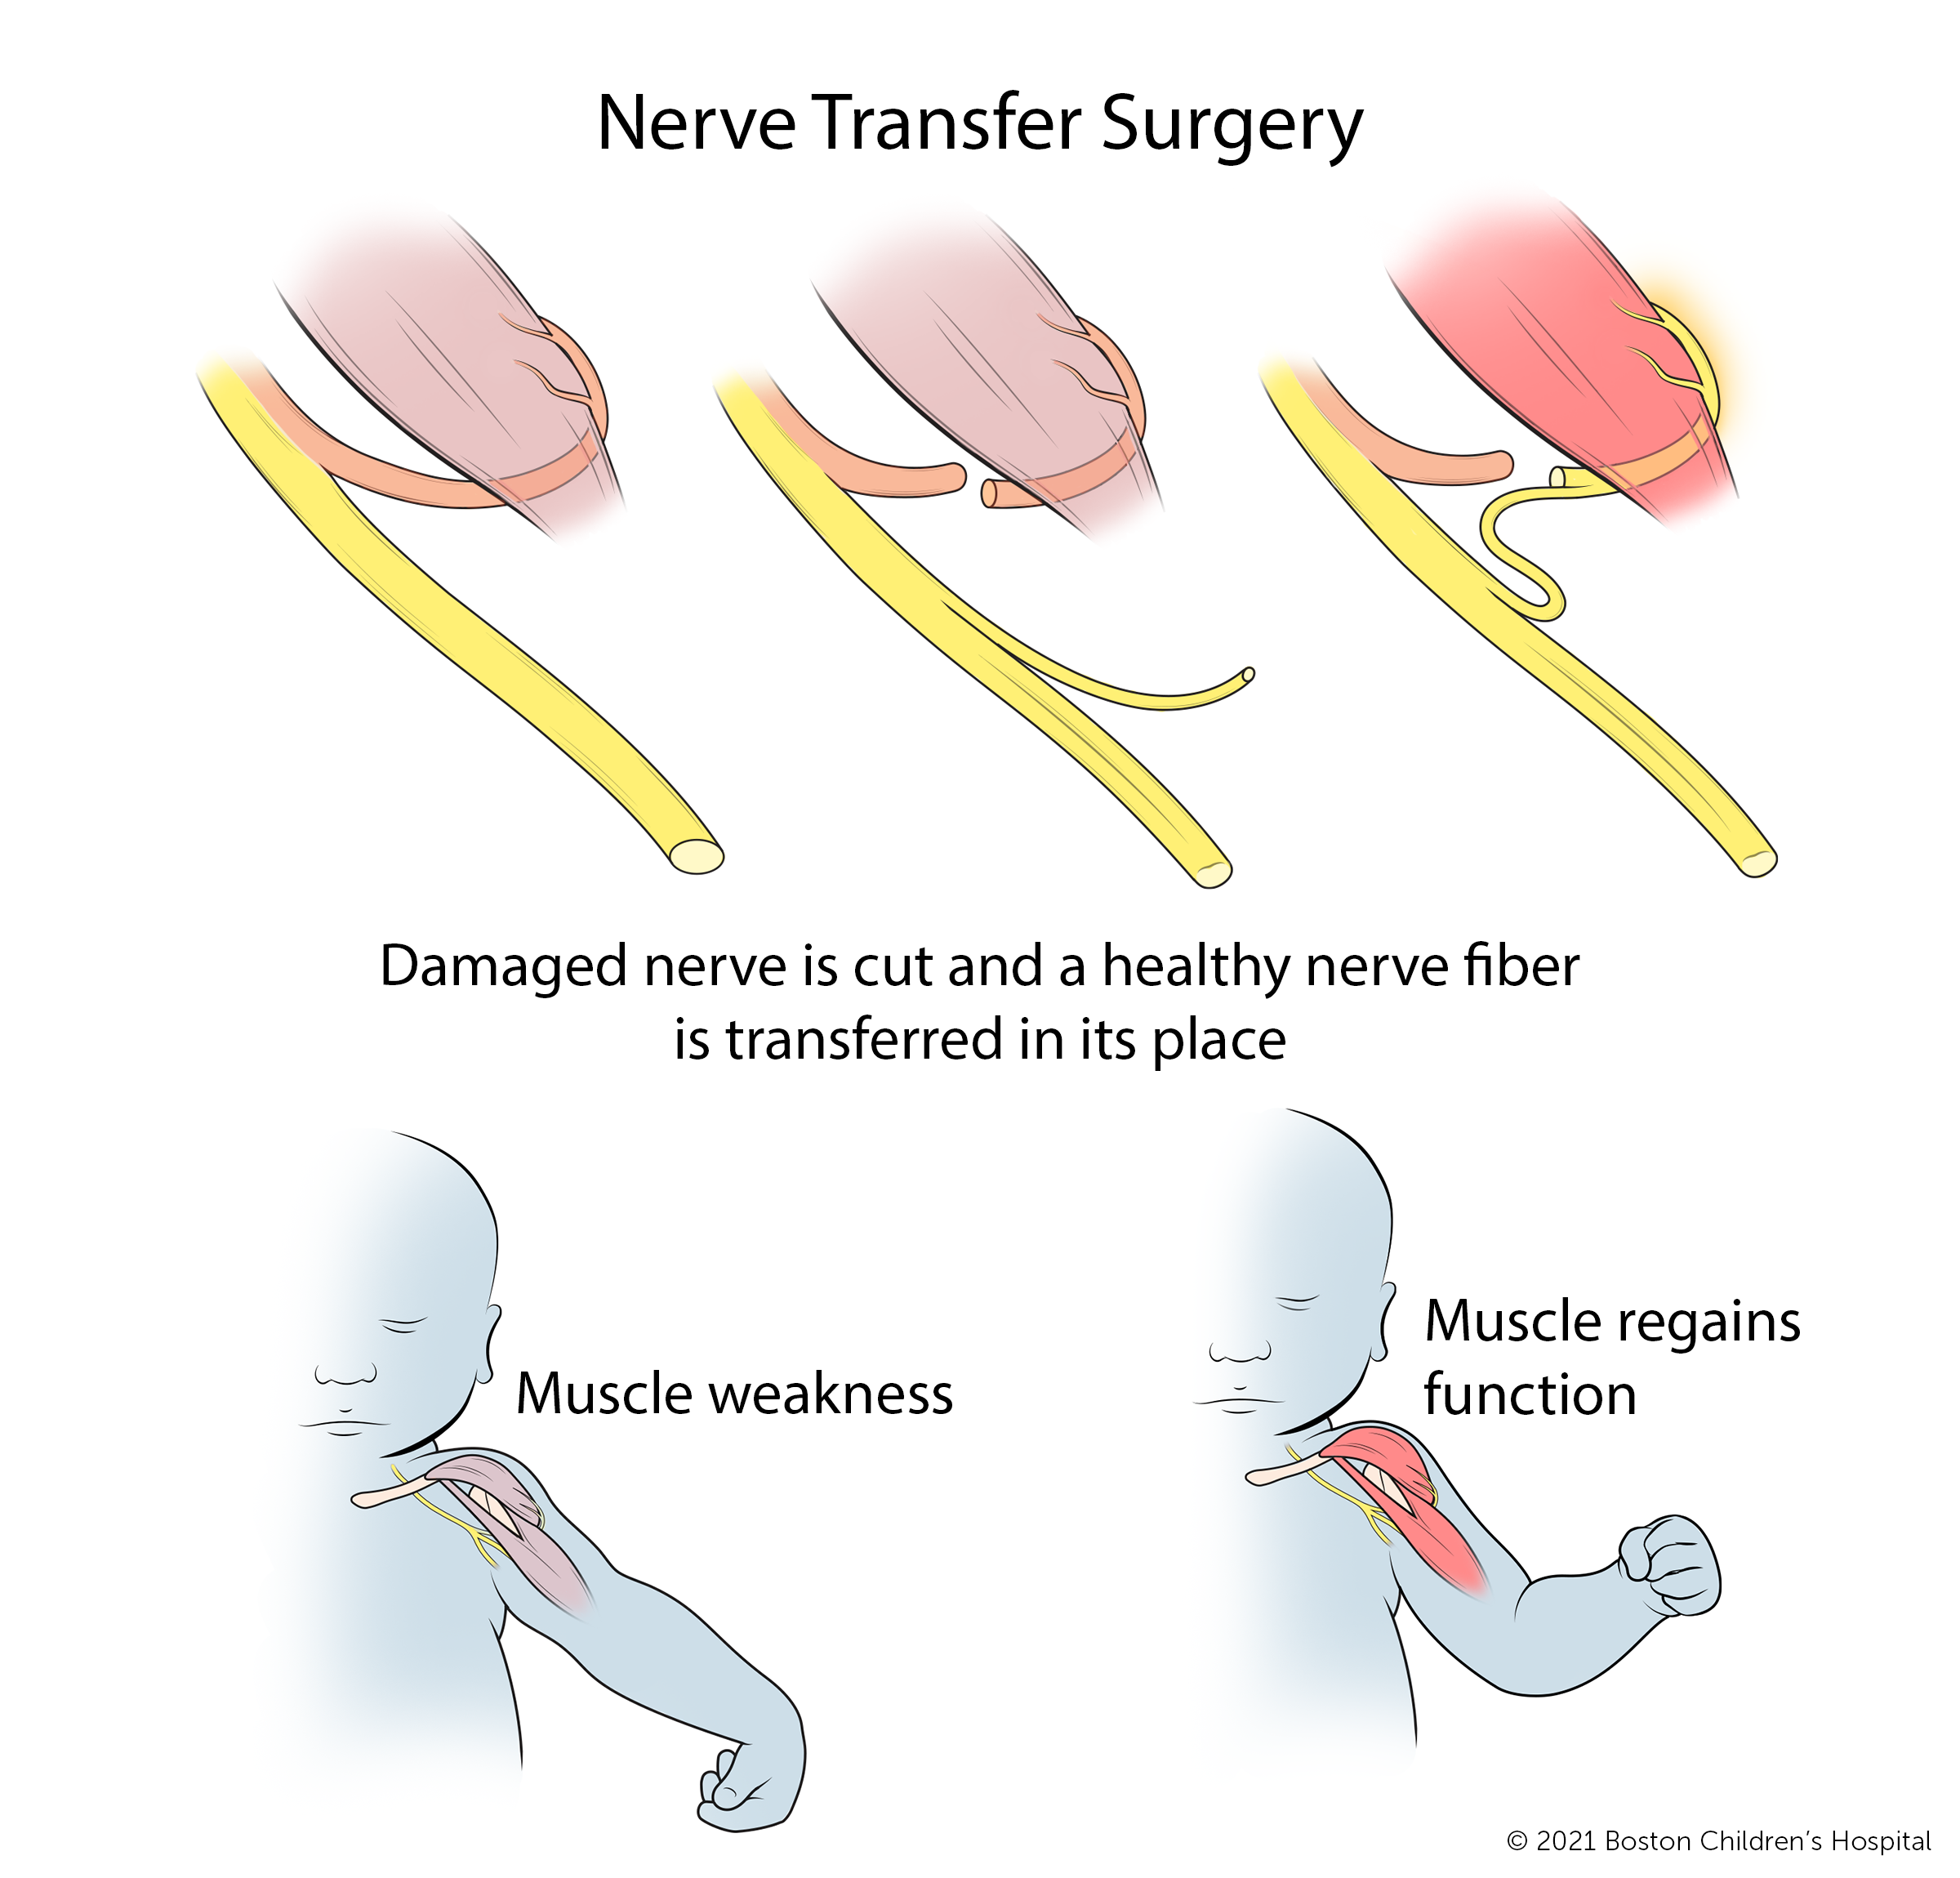 During nerve transfer surgery, the damaged nerve is cut and a healthy nerve fiber is transferred into its place. Over time, the area of muscle weakness regains function.